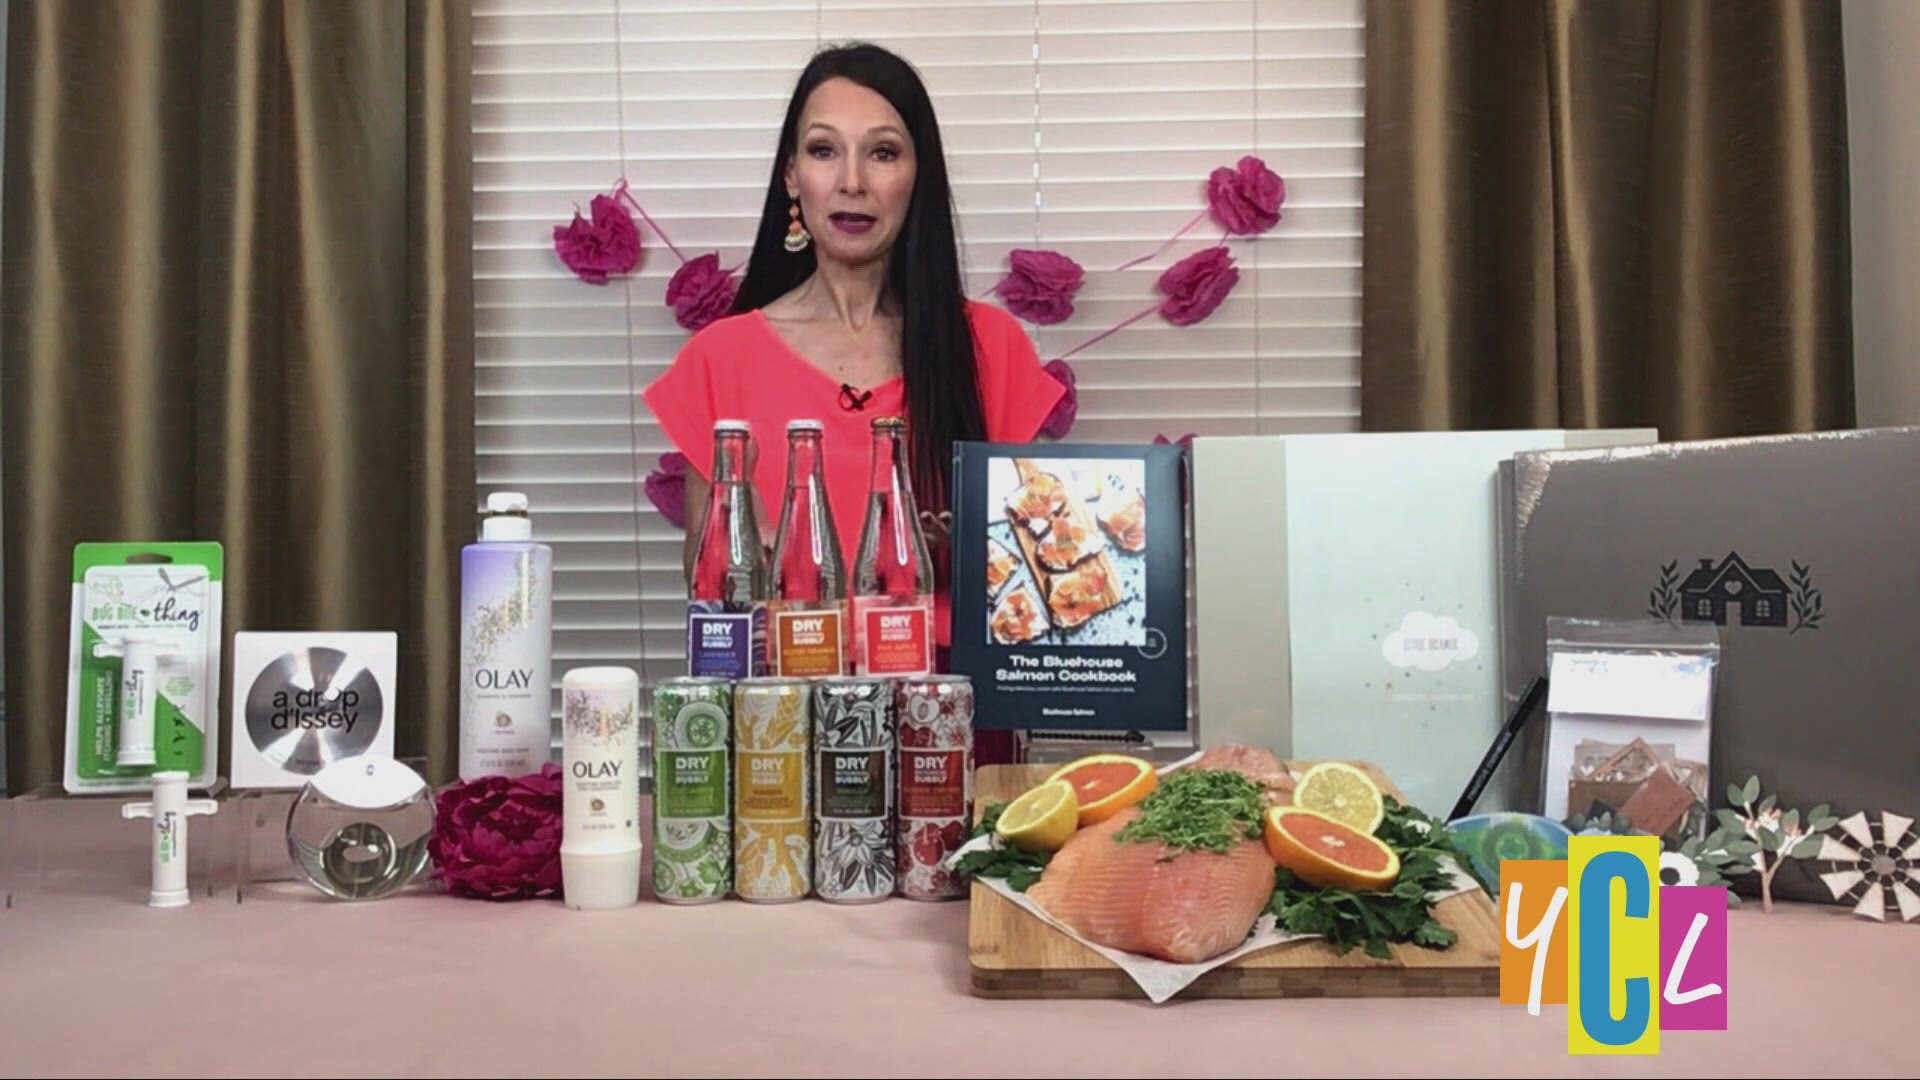 From moms on the go to the health-minded mama bears, Jamie O'Donnell shares her Mother’s Day gift ideas. This segment was paid for by Jamie O + Co.